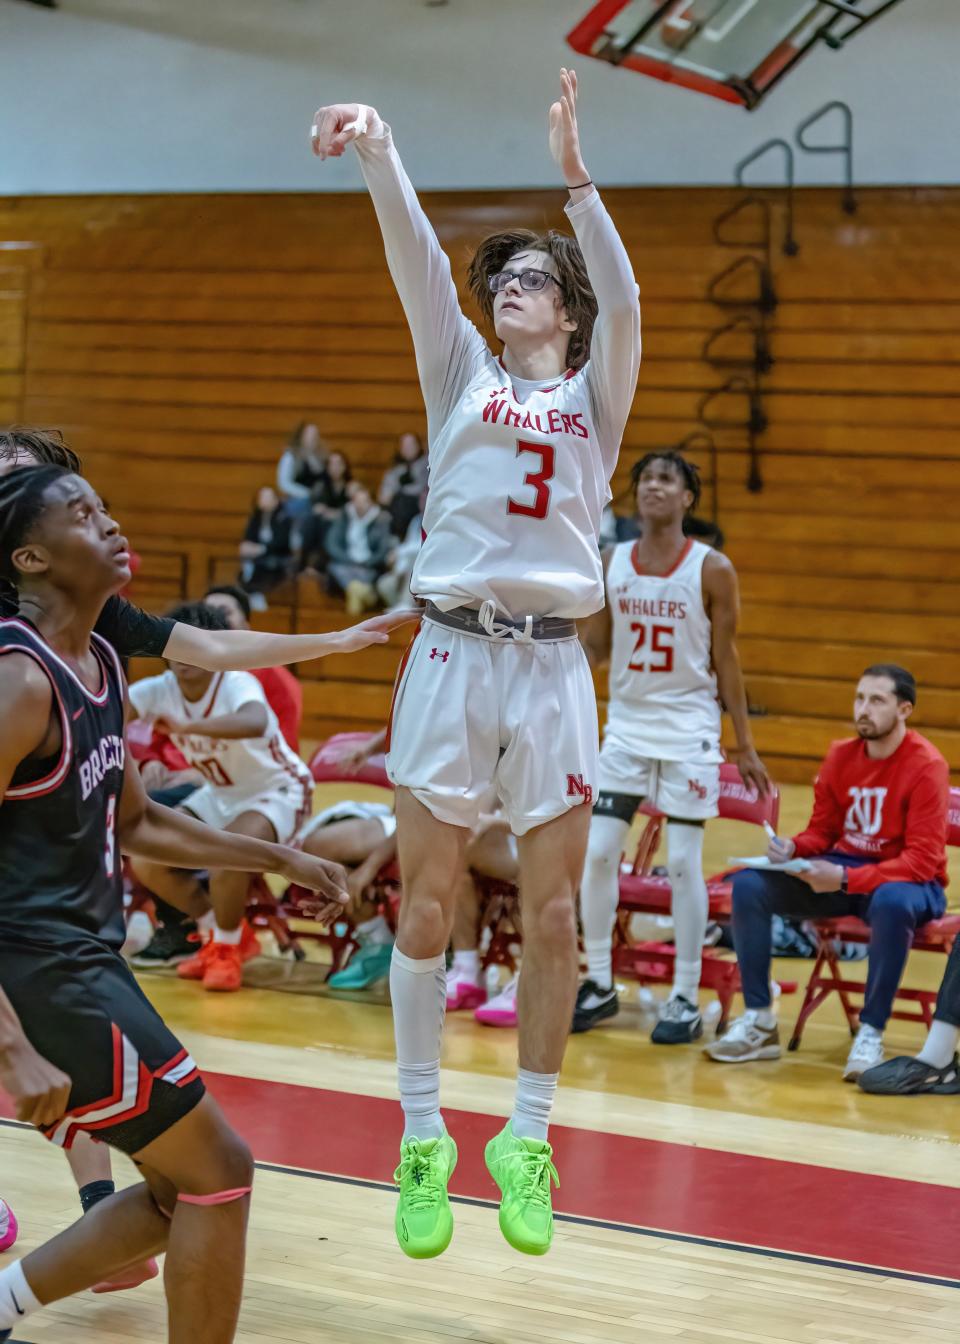 New Bedford guard Craig Baptista follows through as he buries a 3-pointer in front of a Brockton defender late in the fourth quarter on Friday evening.